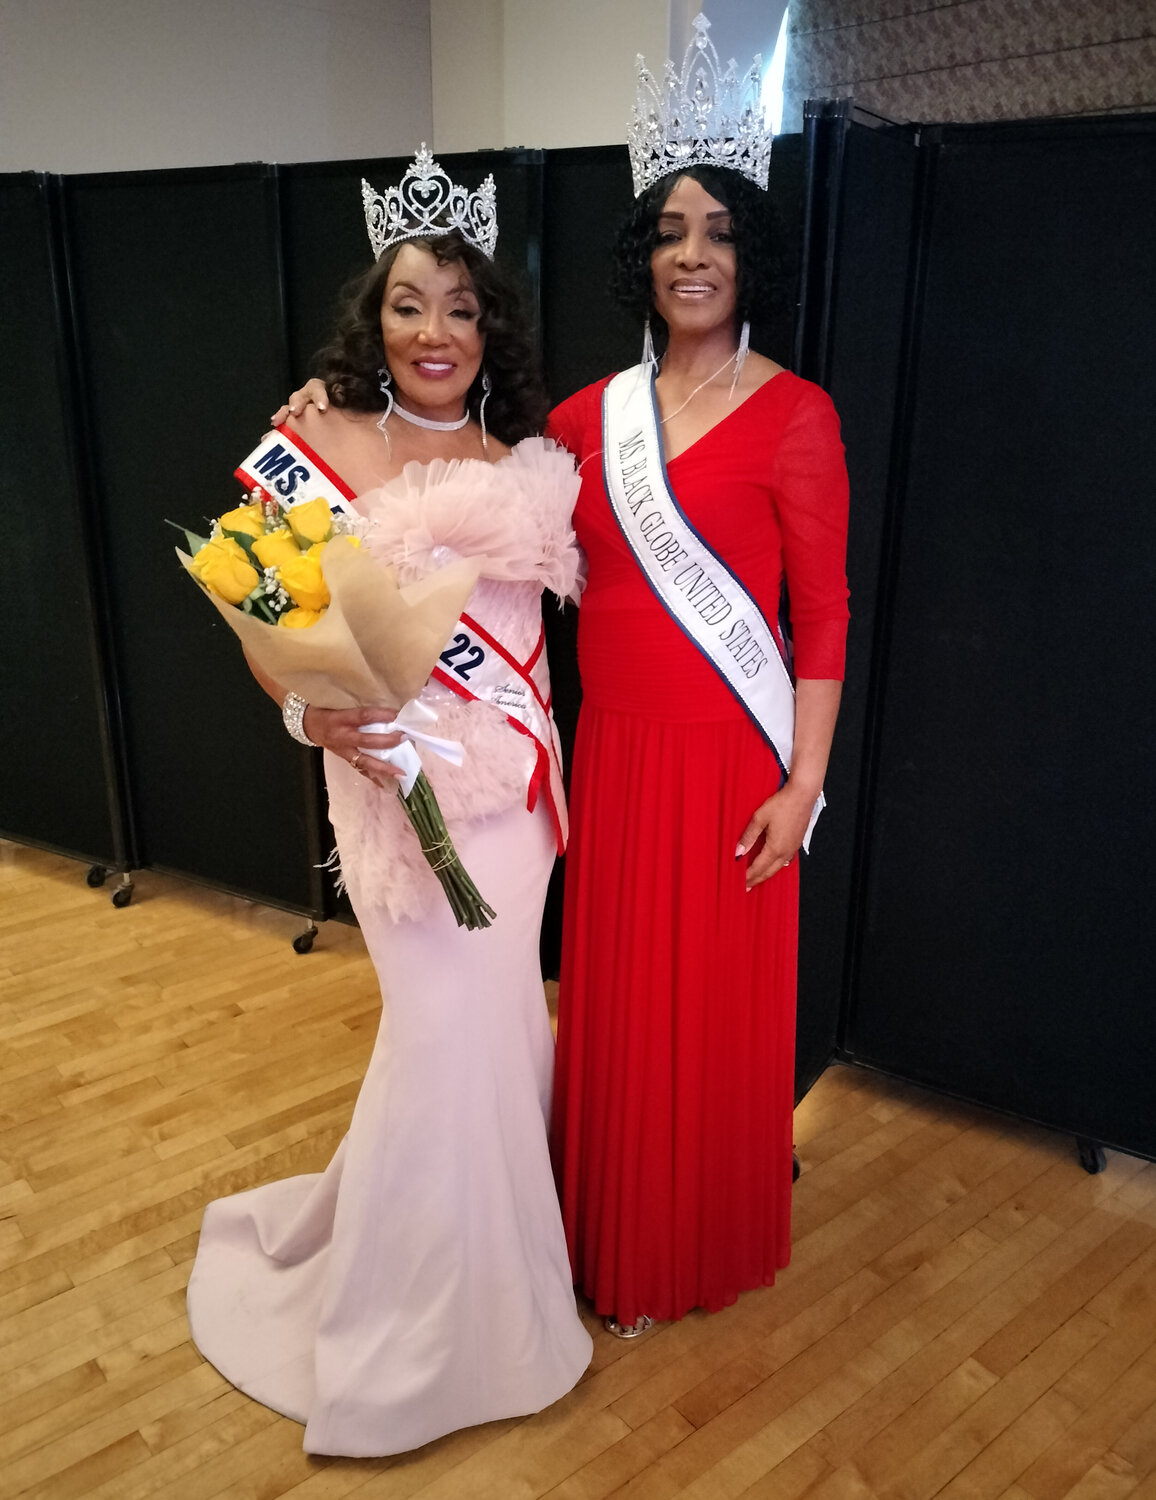 From left, the 2022 Ms. Senior Arizona Patricia Person poses with the reigning 2023 Ms. Black Globe United States Kim Anderson in June.